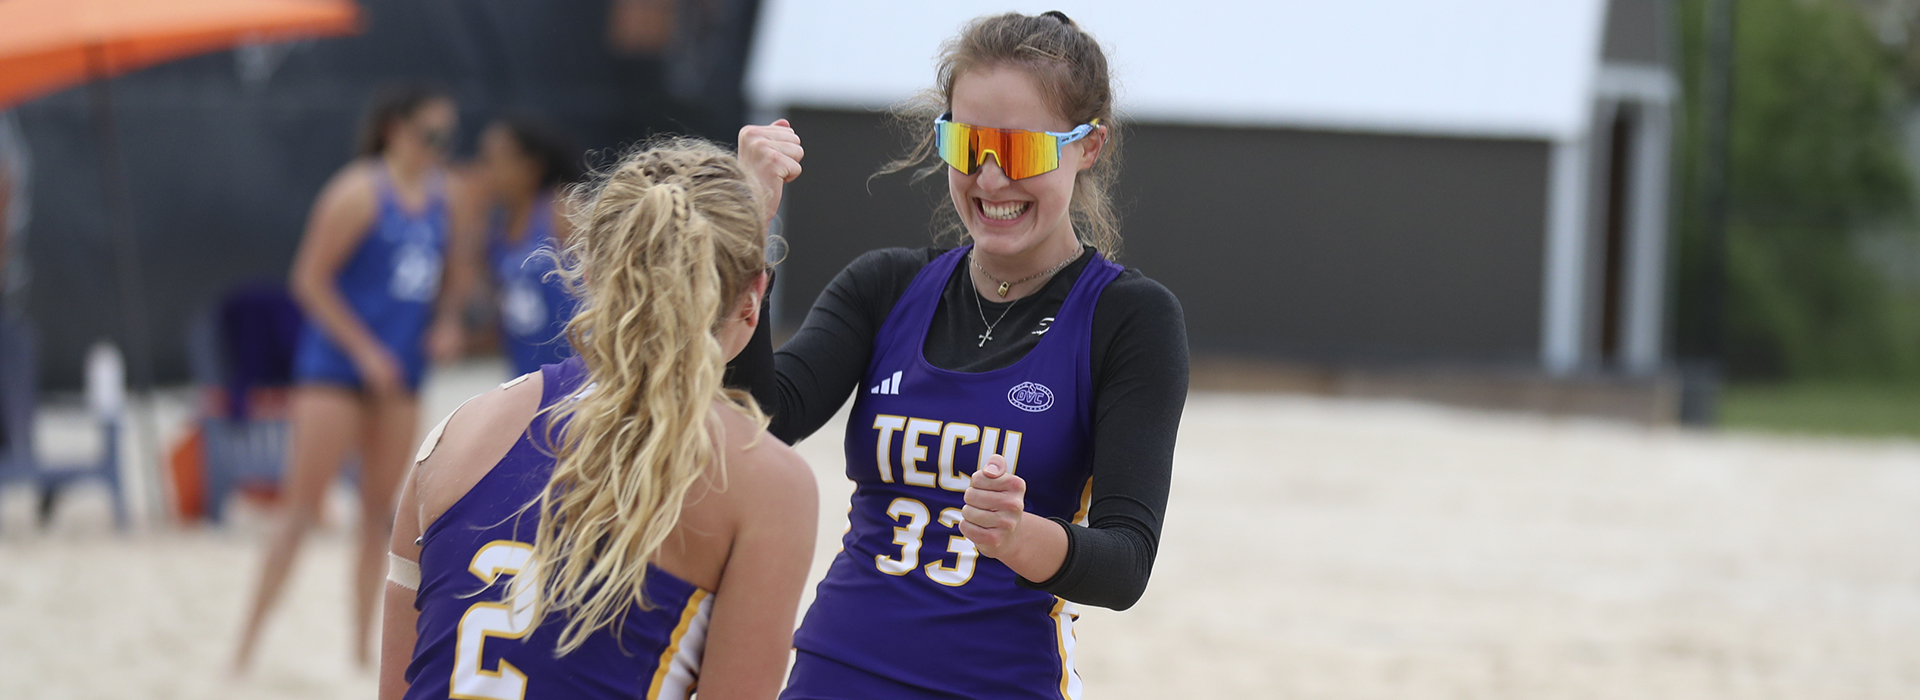 First Tech beach campaign concludes in impressive fashion, 1-1 showing on day two of OVC Tournament